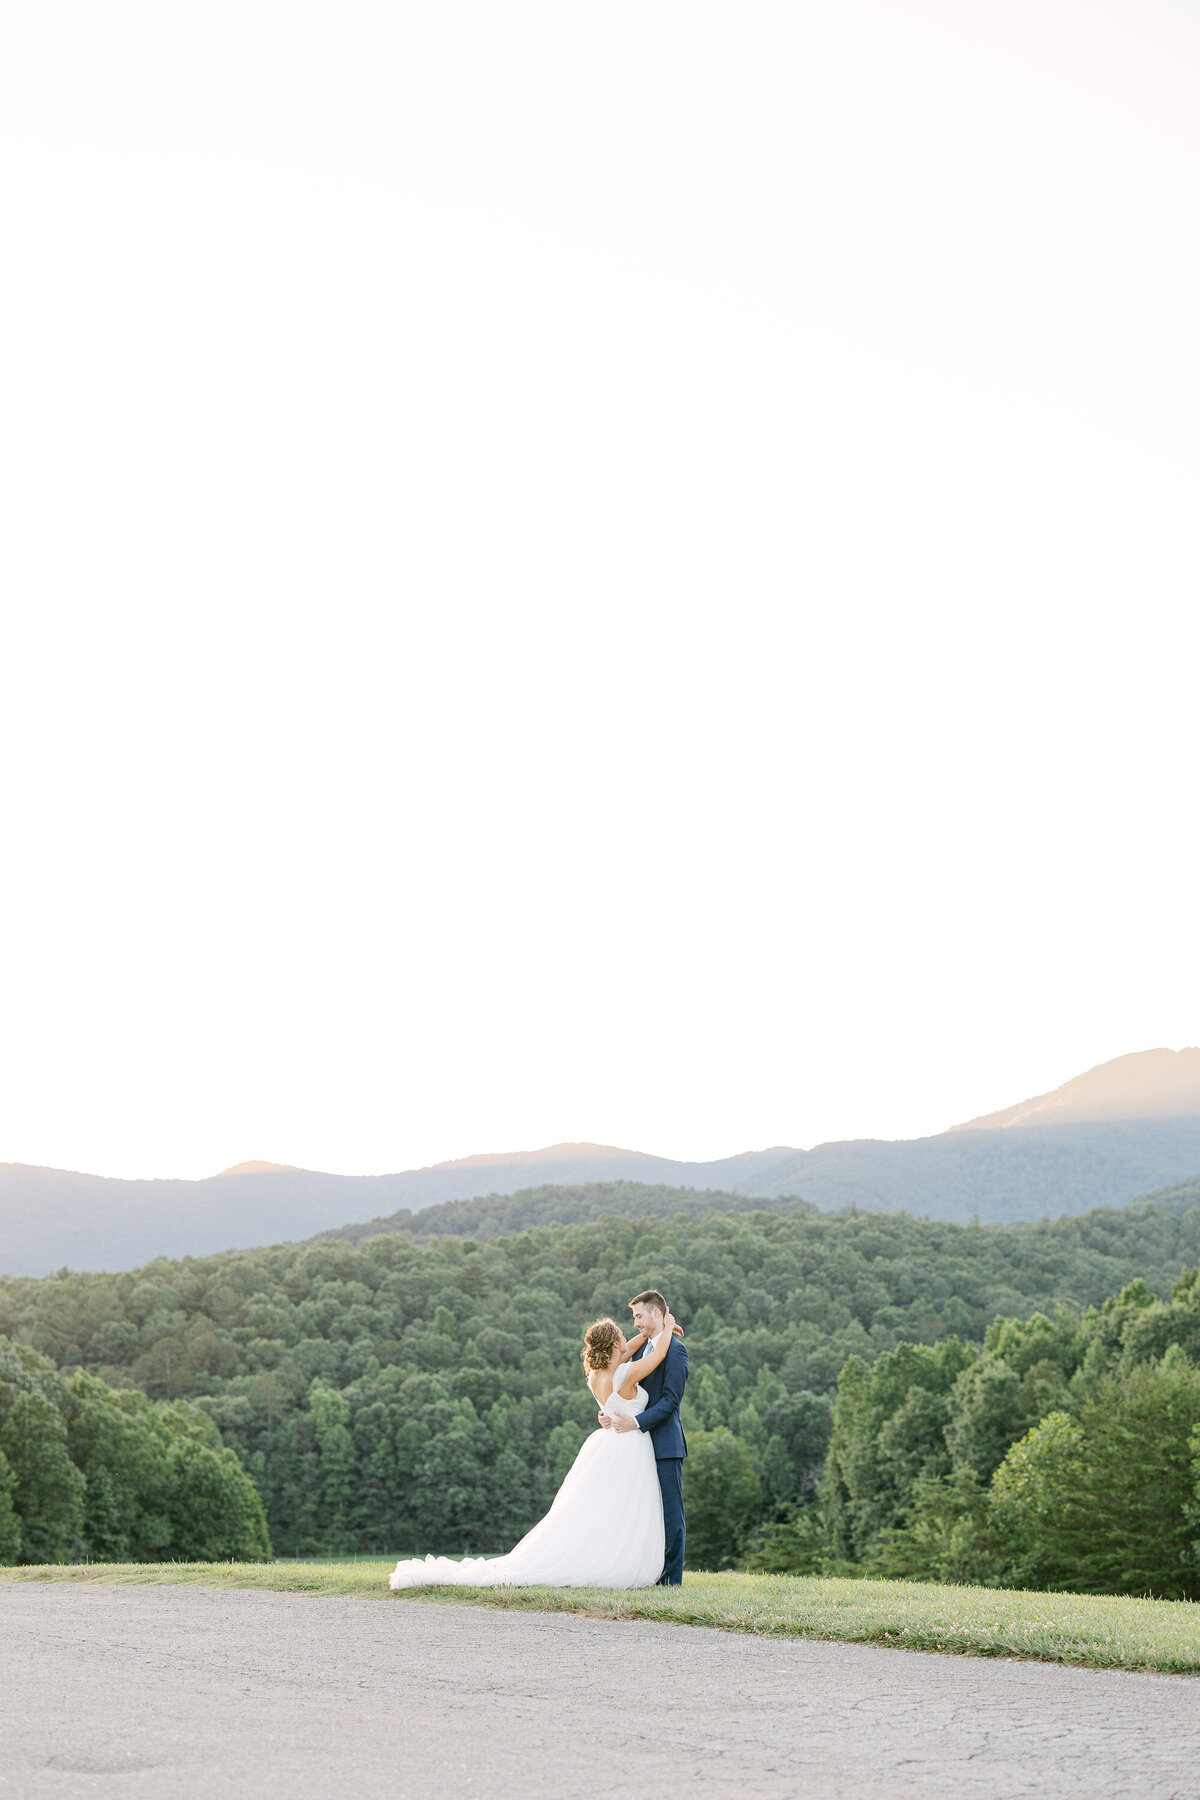 Emma and Ross Slideshow - Darian Reilly Photography-127